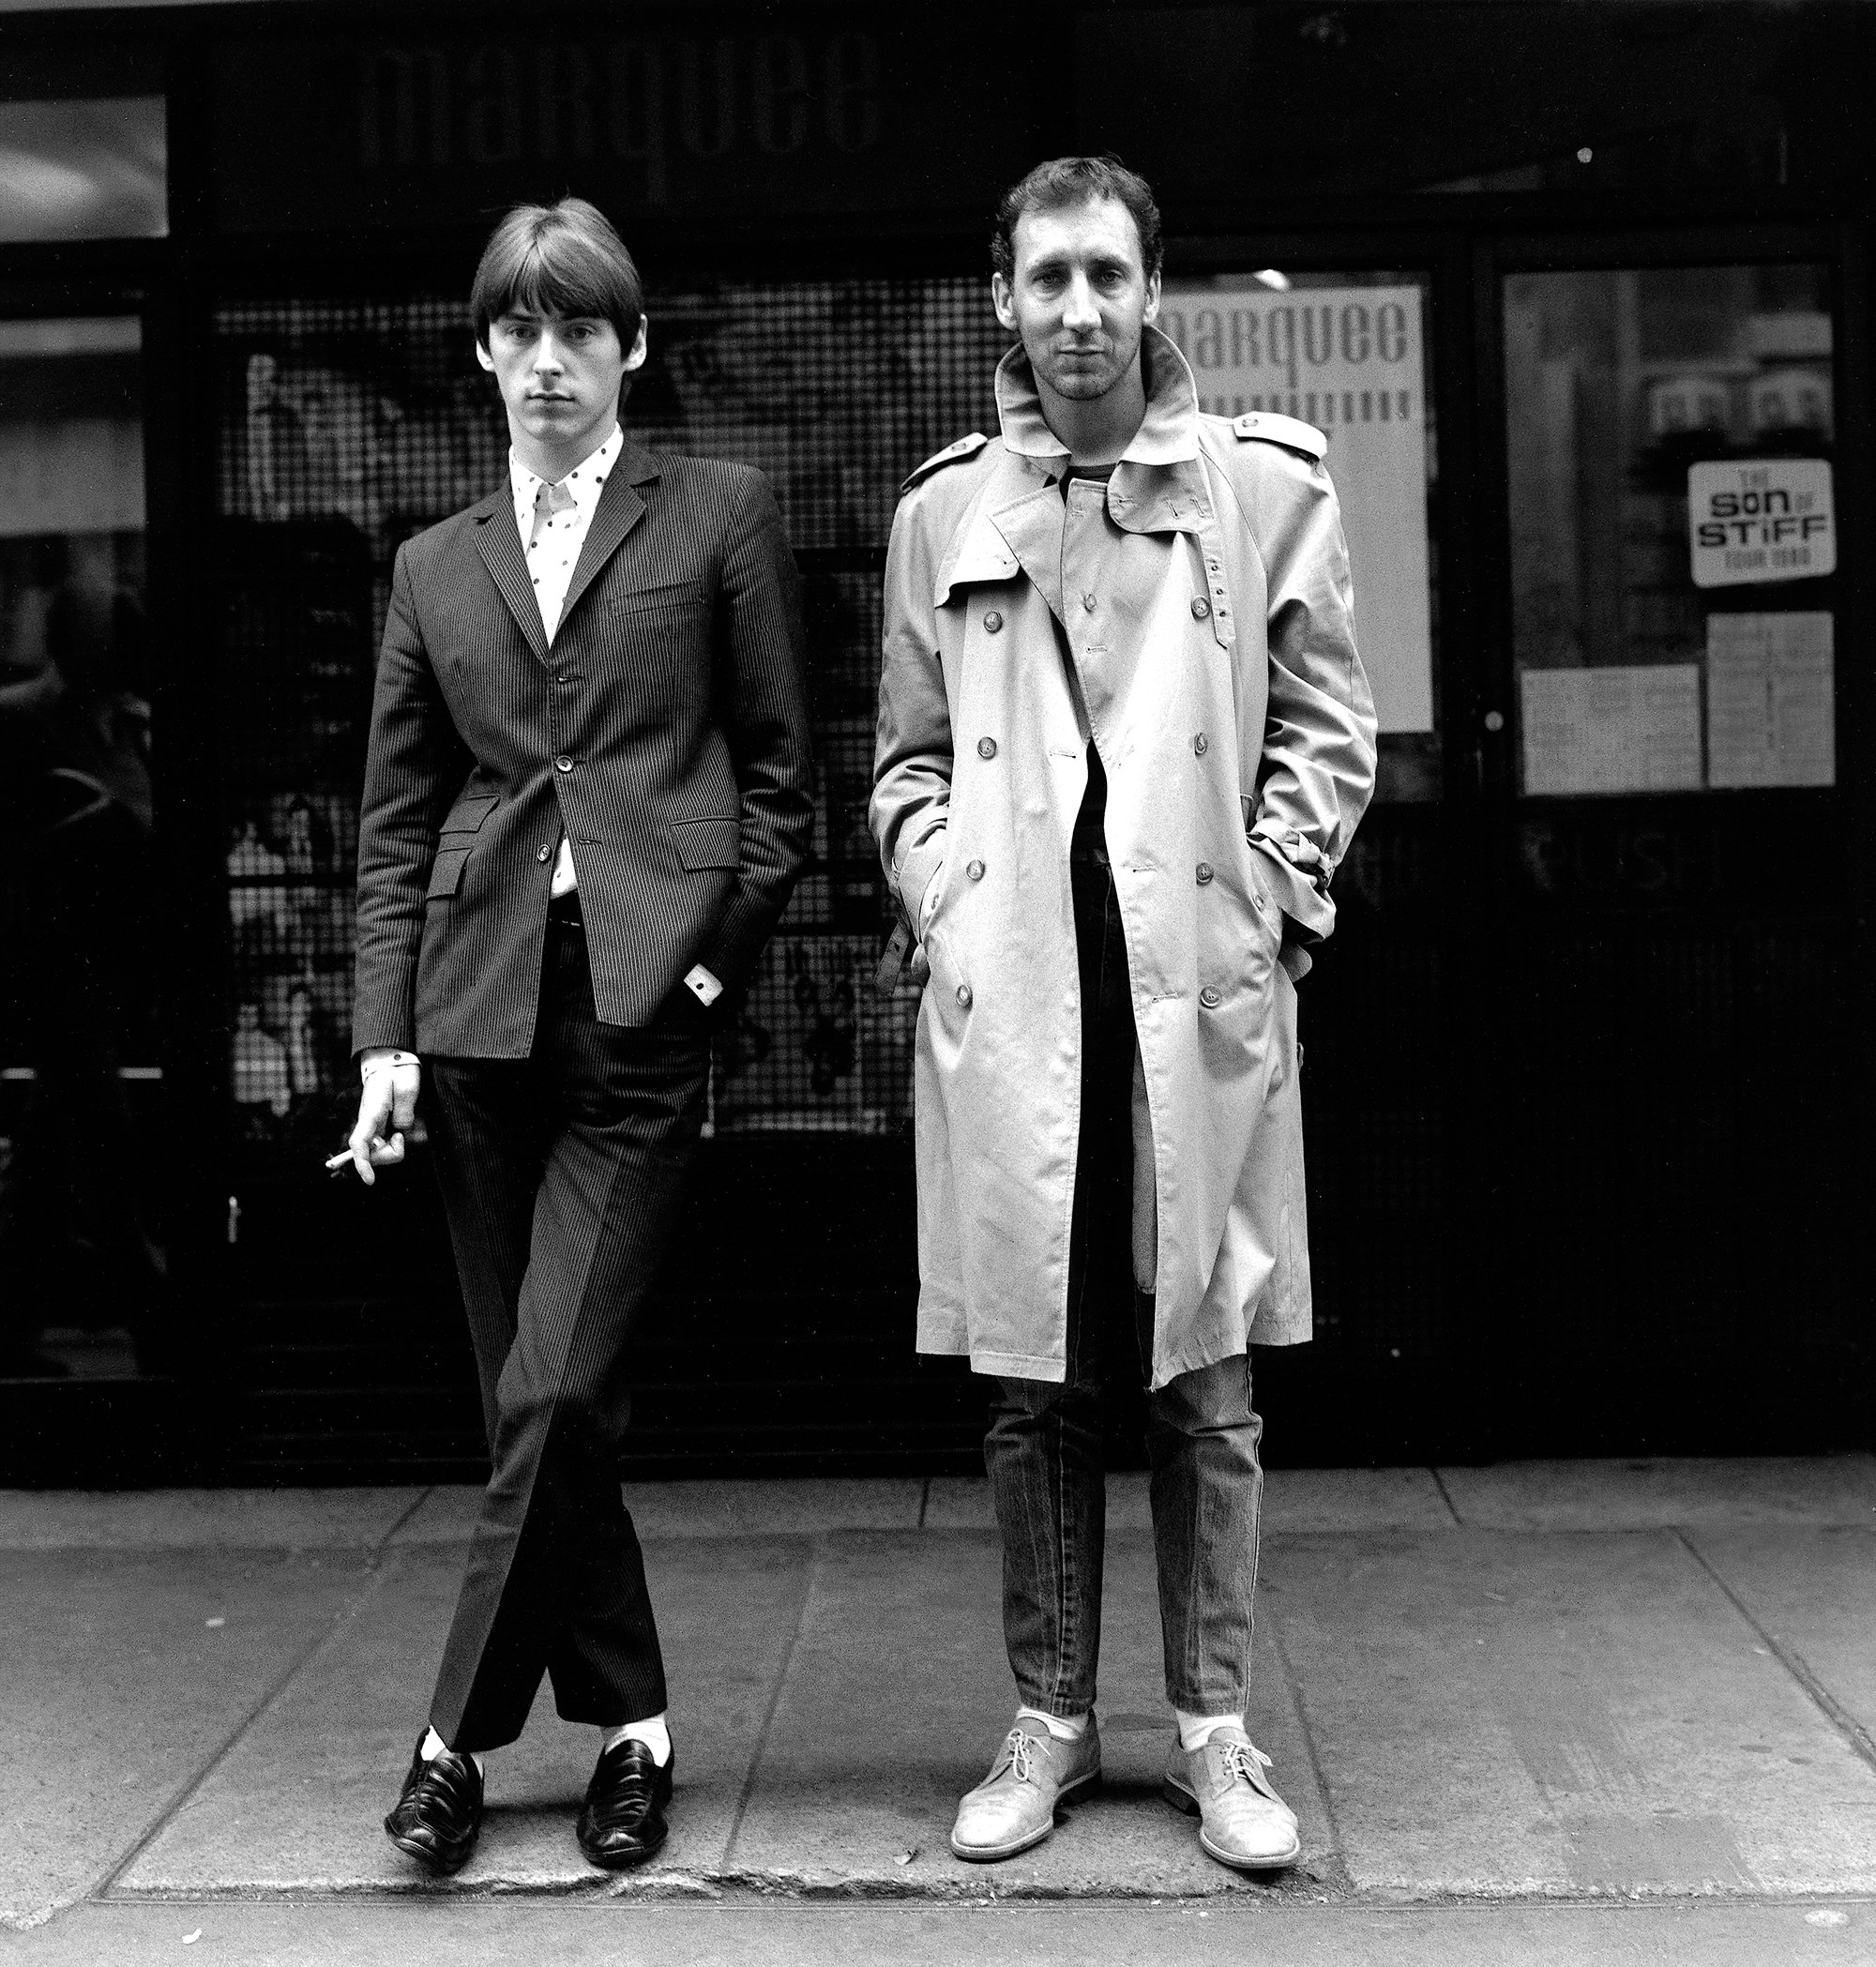 Paul Weller and Pete Townsend, Soho, London, 1980 © Janette Beckman; courtesy of Fahey/Klein Gallery, Los Angeles